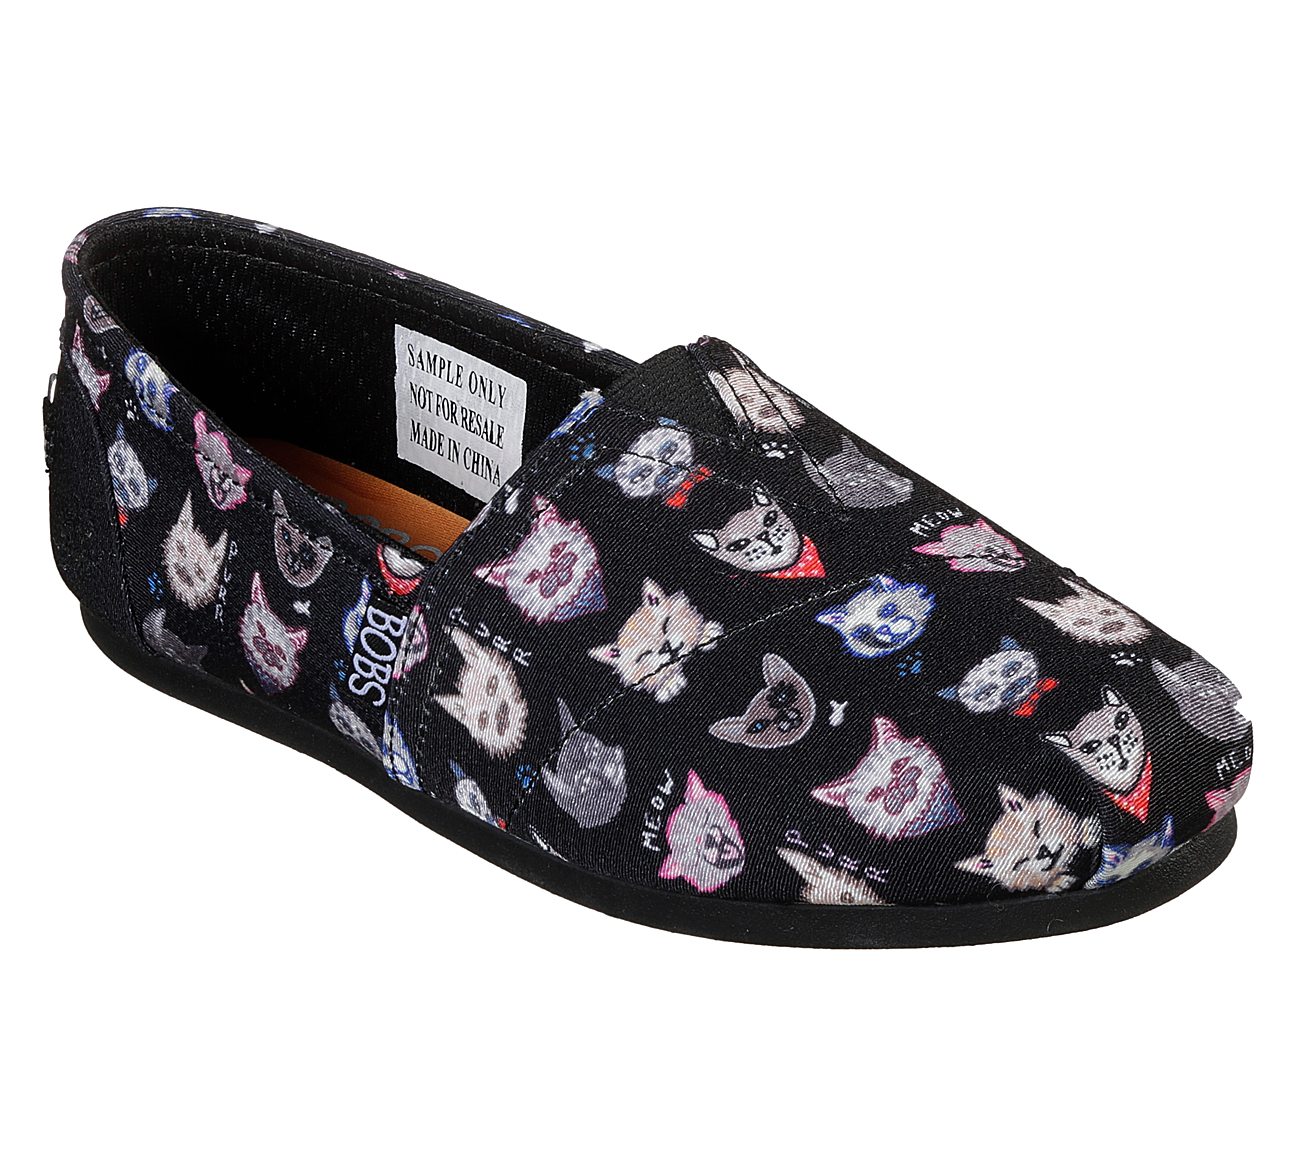 bobs shoes with cats on them